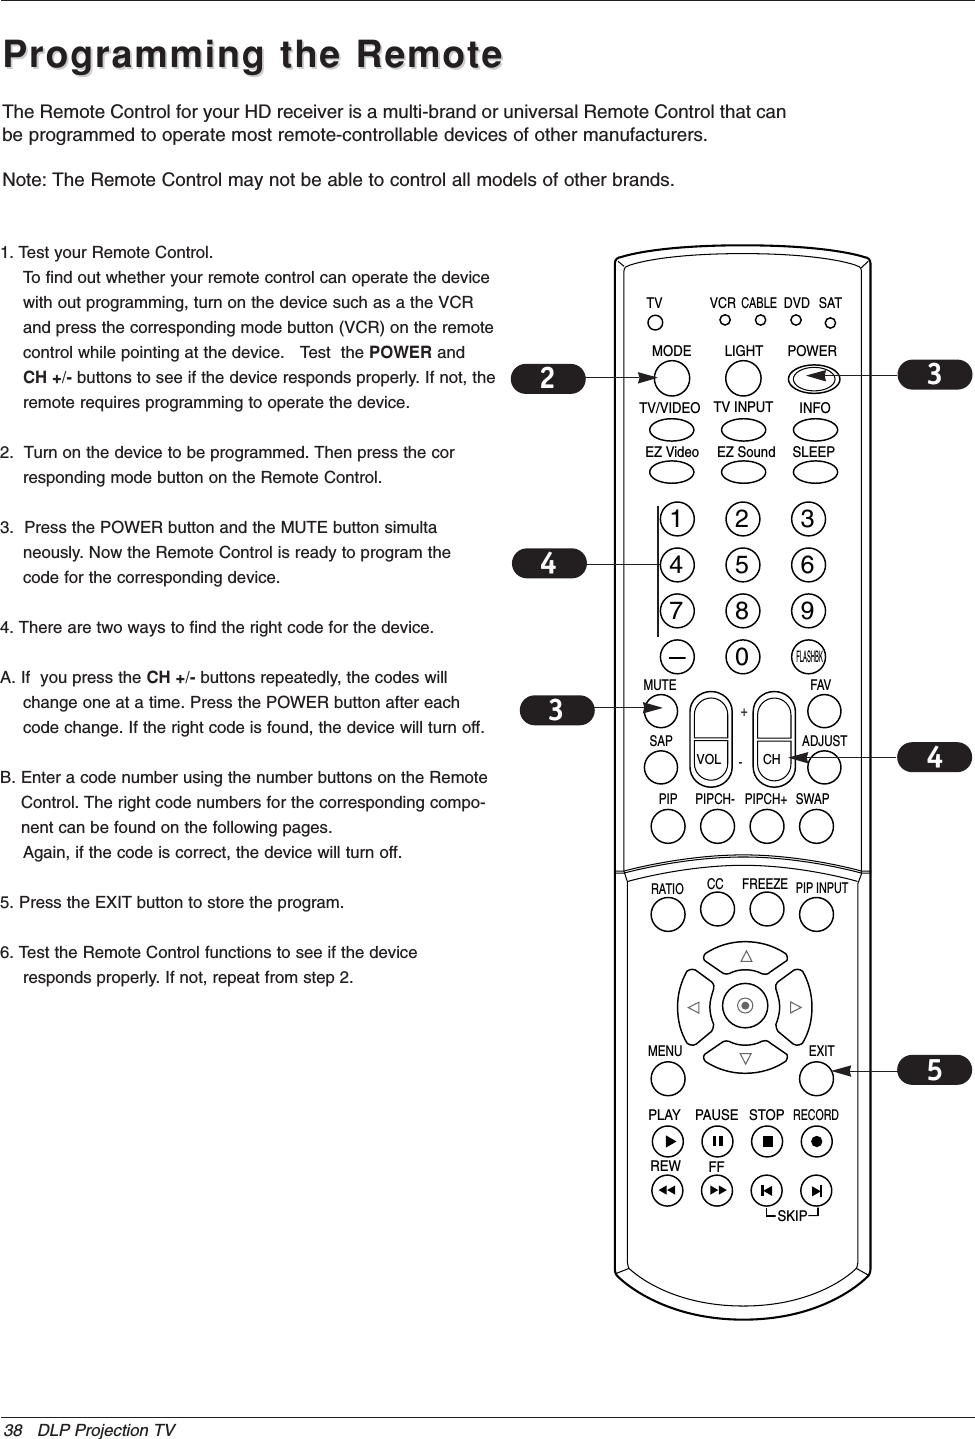 38 DLP Projection TVProgramming the RemoteProgramming the Remote1. Test your Remote Control.To find out whether your remote control can operate the device with out programming, turn on the device such as a the VCR and press the corresponding mode button (VCR) on the remote control while pointing at the device.  Test  the POWER and  CH +/- buttons to see if the device responds properly. If not, the remote requires programming to operate the device.2.  Turn on the device to be programmed. Then press the corresponding mode button on the Remote Control.3.  Press the POWER button and the MUTE button simultaneously. Now the Remote Control is ready to program the code for the corresponding device.4. There are two ways to find the right code for the device.A. If  you press the CH +/- buttons repeatedly, the codes will change one at a time. Press the POWER button after each code change. If the right code is found, the device will turn off.B. Enter a code number using the number buttons on the RemoteControl. The right code numbers for the corresponding compo-nent can be found on the following pages.Again, if the code is correct, the device will turn off.5. Press the EXIT button to store the program.6. Test the Remote Control functions to see if the device responds properly. If not, repeat from step 2.1234567890TVMODE LIGHT POWER   TV/VIDEO INFOSLEEPVCRCABLEDVD SATMUTESWAPPIPCH- PIPCH+PIPRATIORECORDSTOPPAUSEREWPLAYFFMENU EXITCC FREEZEPIP INPUTVOL CHFAVSAP ADJUSTEZ SoundEZ VideoTV INPUTSKIPFLASHBK  +-24534The Remote Control for your HD receiver is a multi-brand or universal Remote Control that canbe programmed to operate most remote-controllable devices of other manufacturers.Note: The Remote Control may not be able to control all models of other brands.3